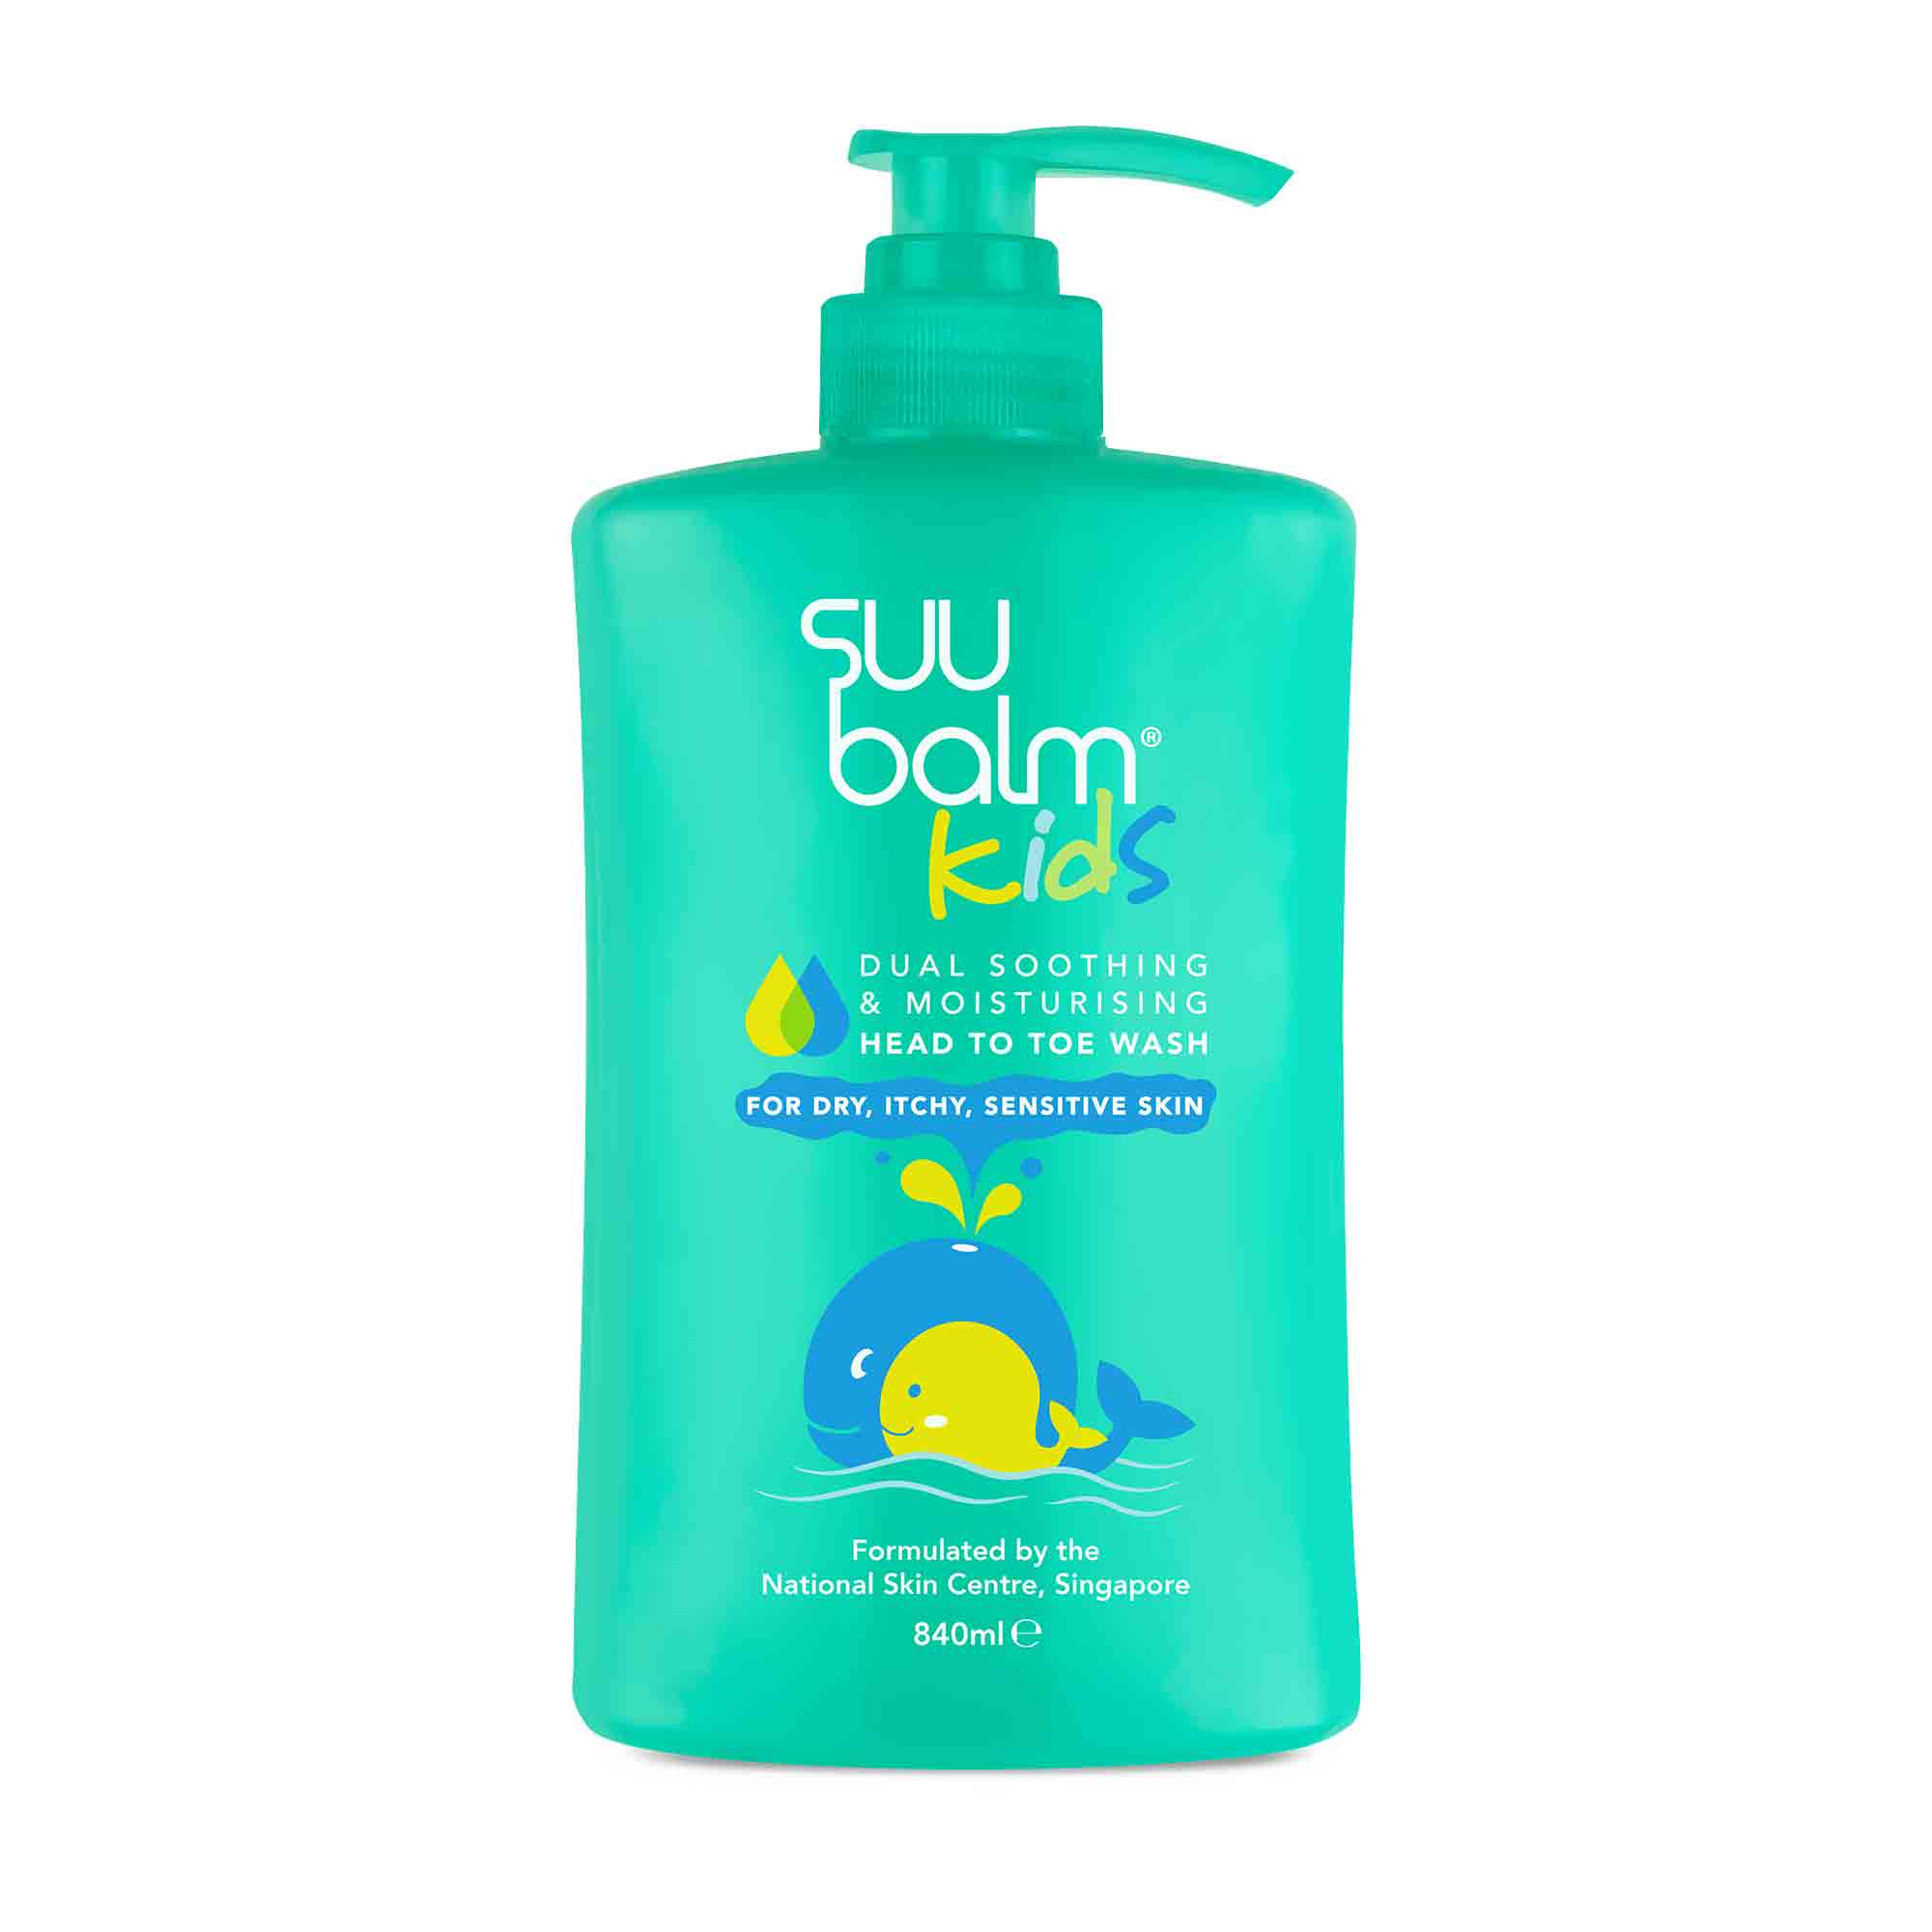 Suu Balm Kids Dual Soothing and Moisturising Head-to-Toe Wash  *20% OFF 2 Items purchased